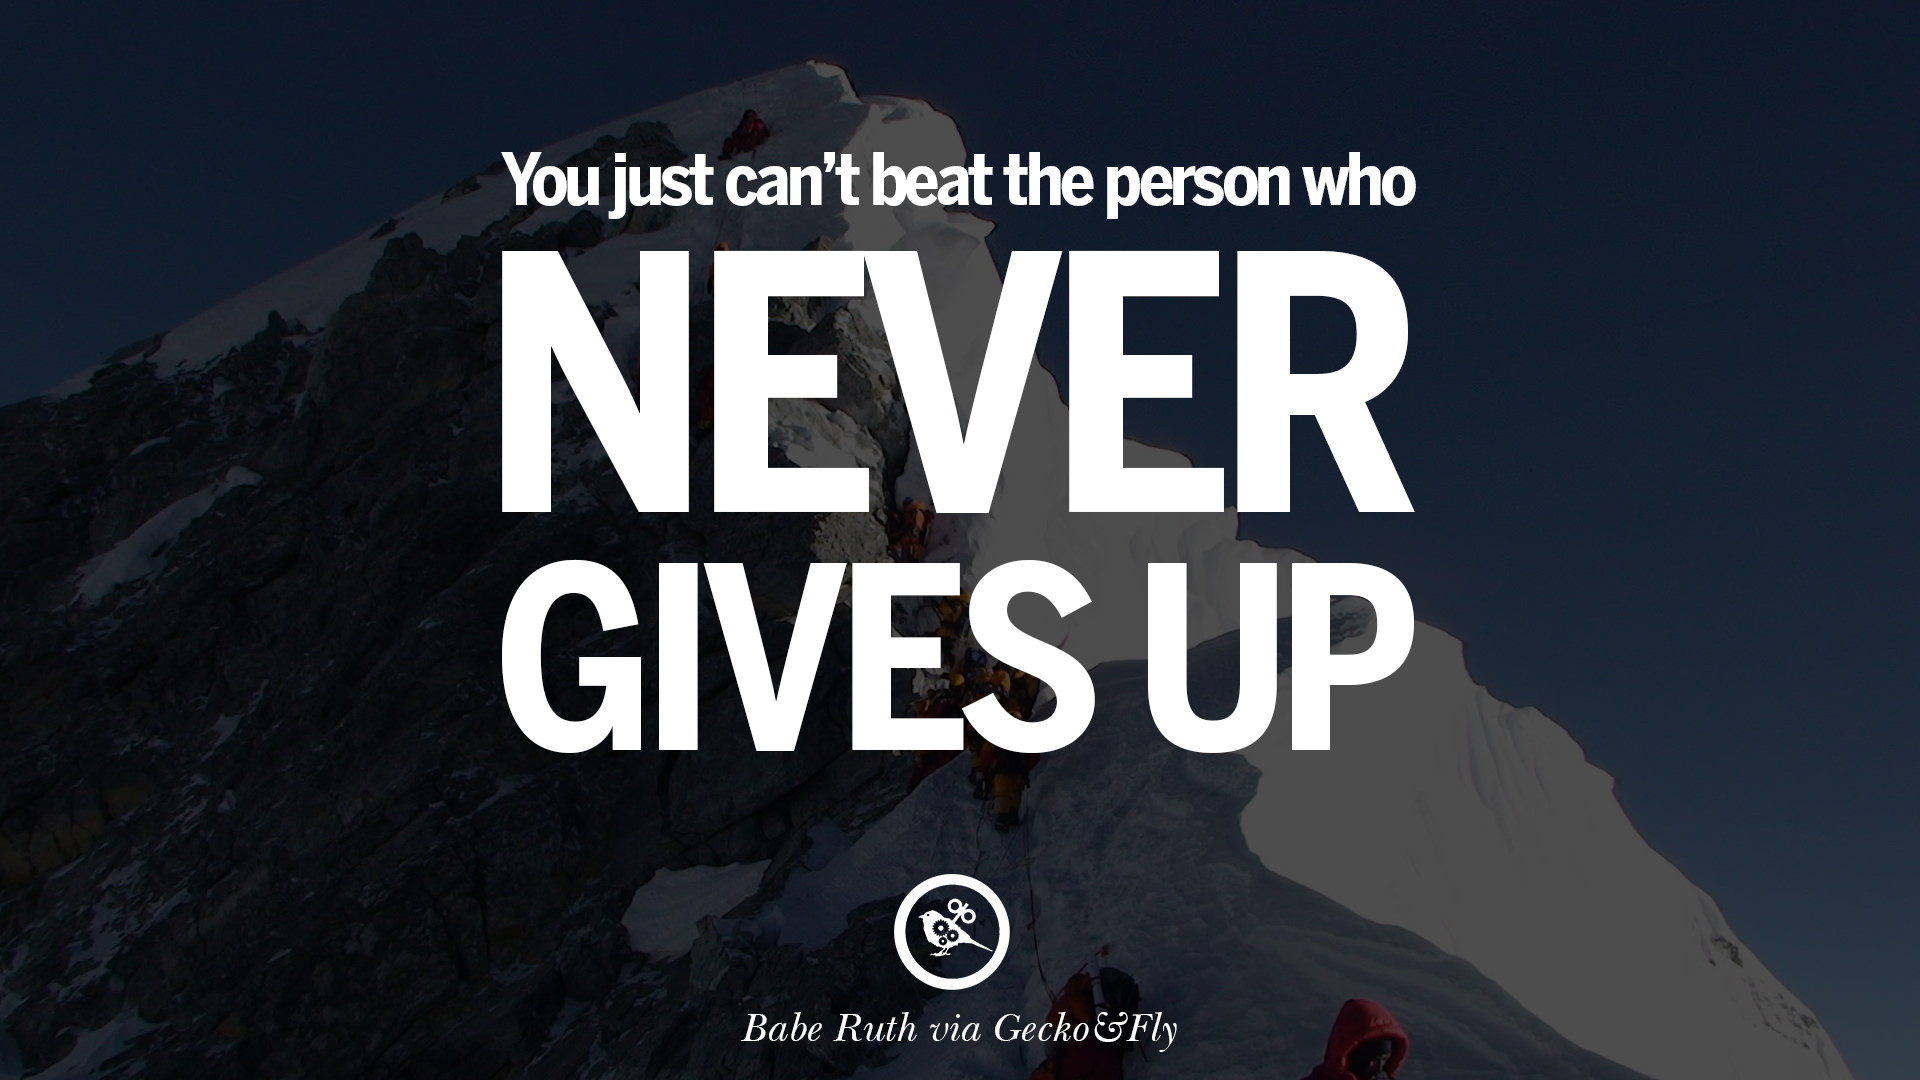 Motivational Sport Quotes
 20 Encouraging and Motivational Poster Quotes on Sports